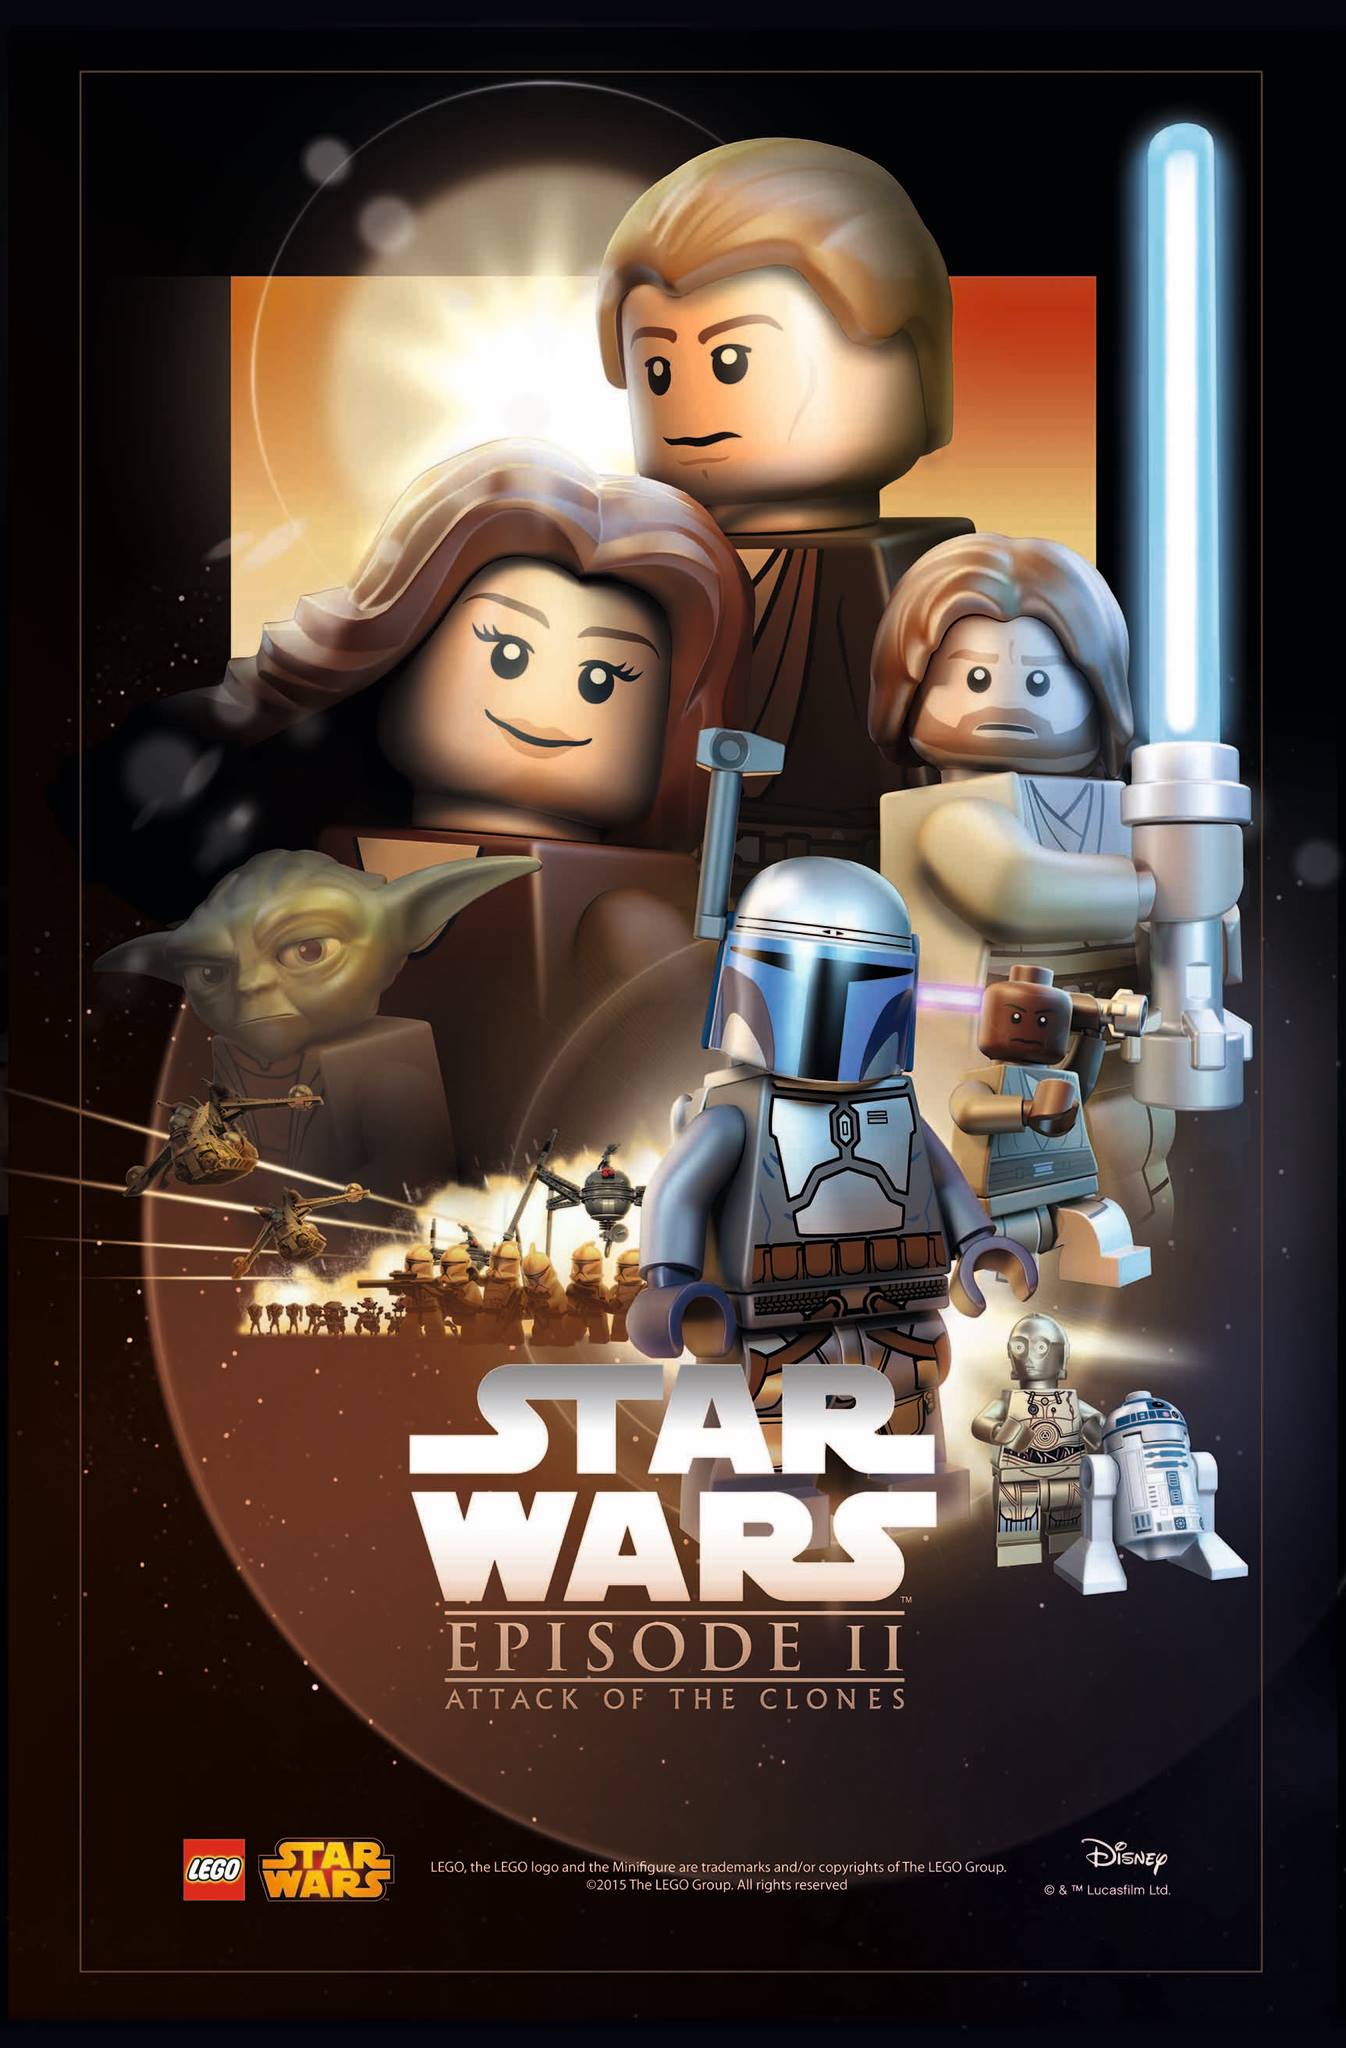 LEGO Star Wars Episode II: Attack of the Clones | Wookieepedia